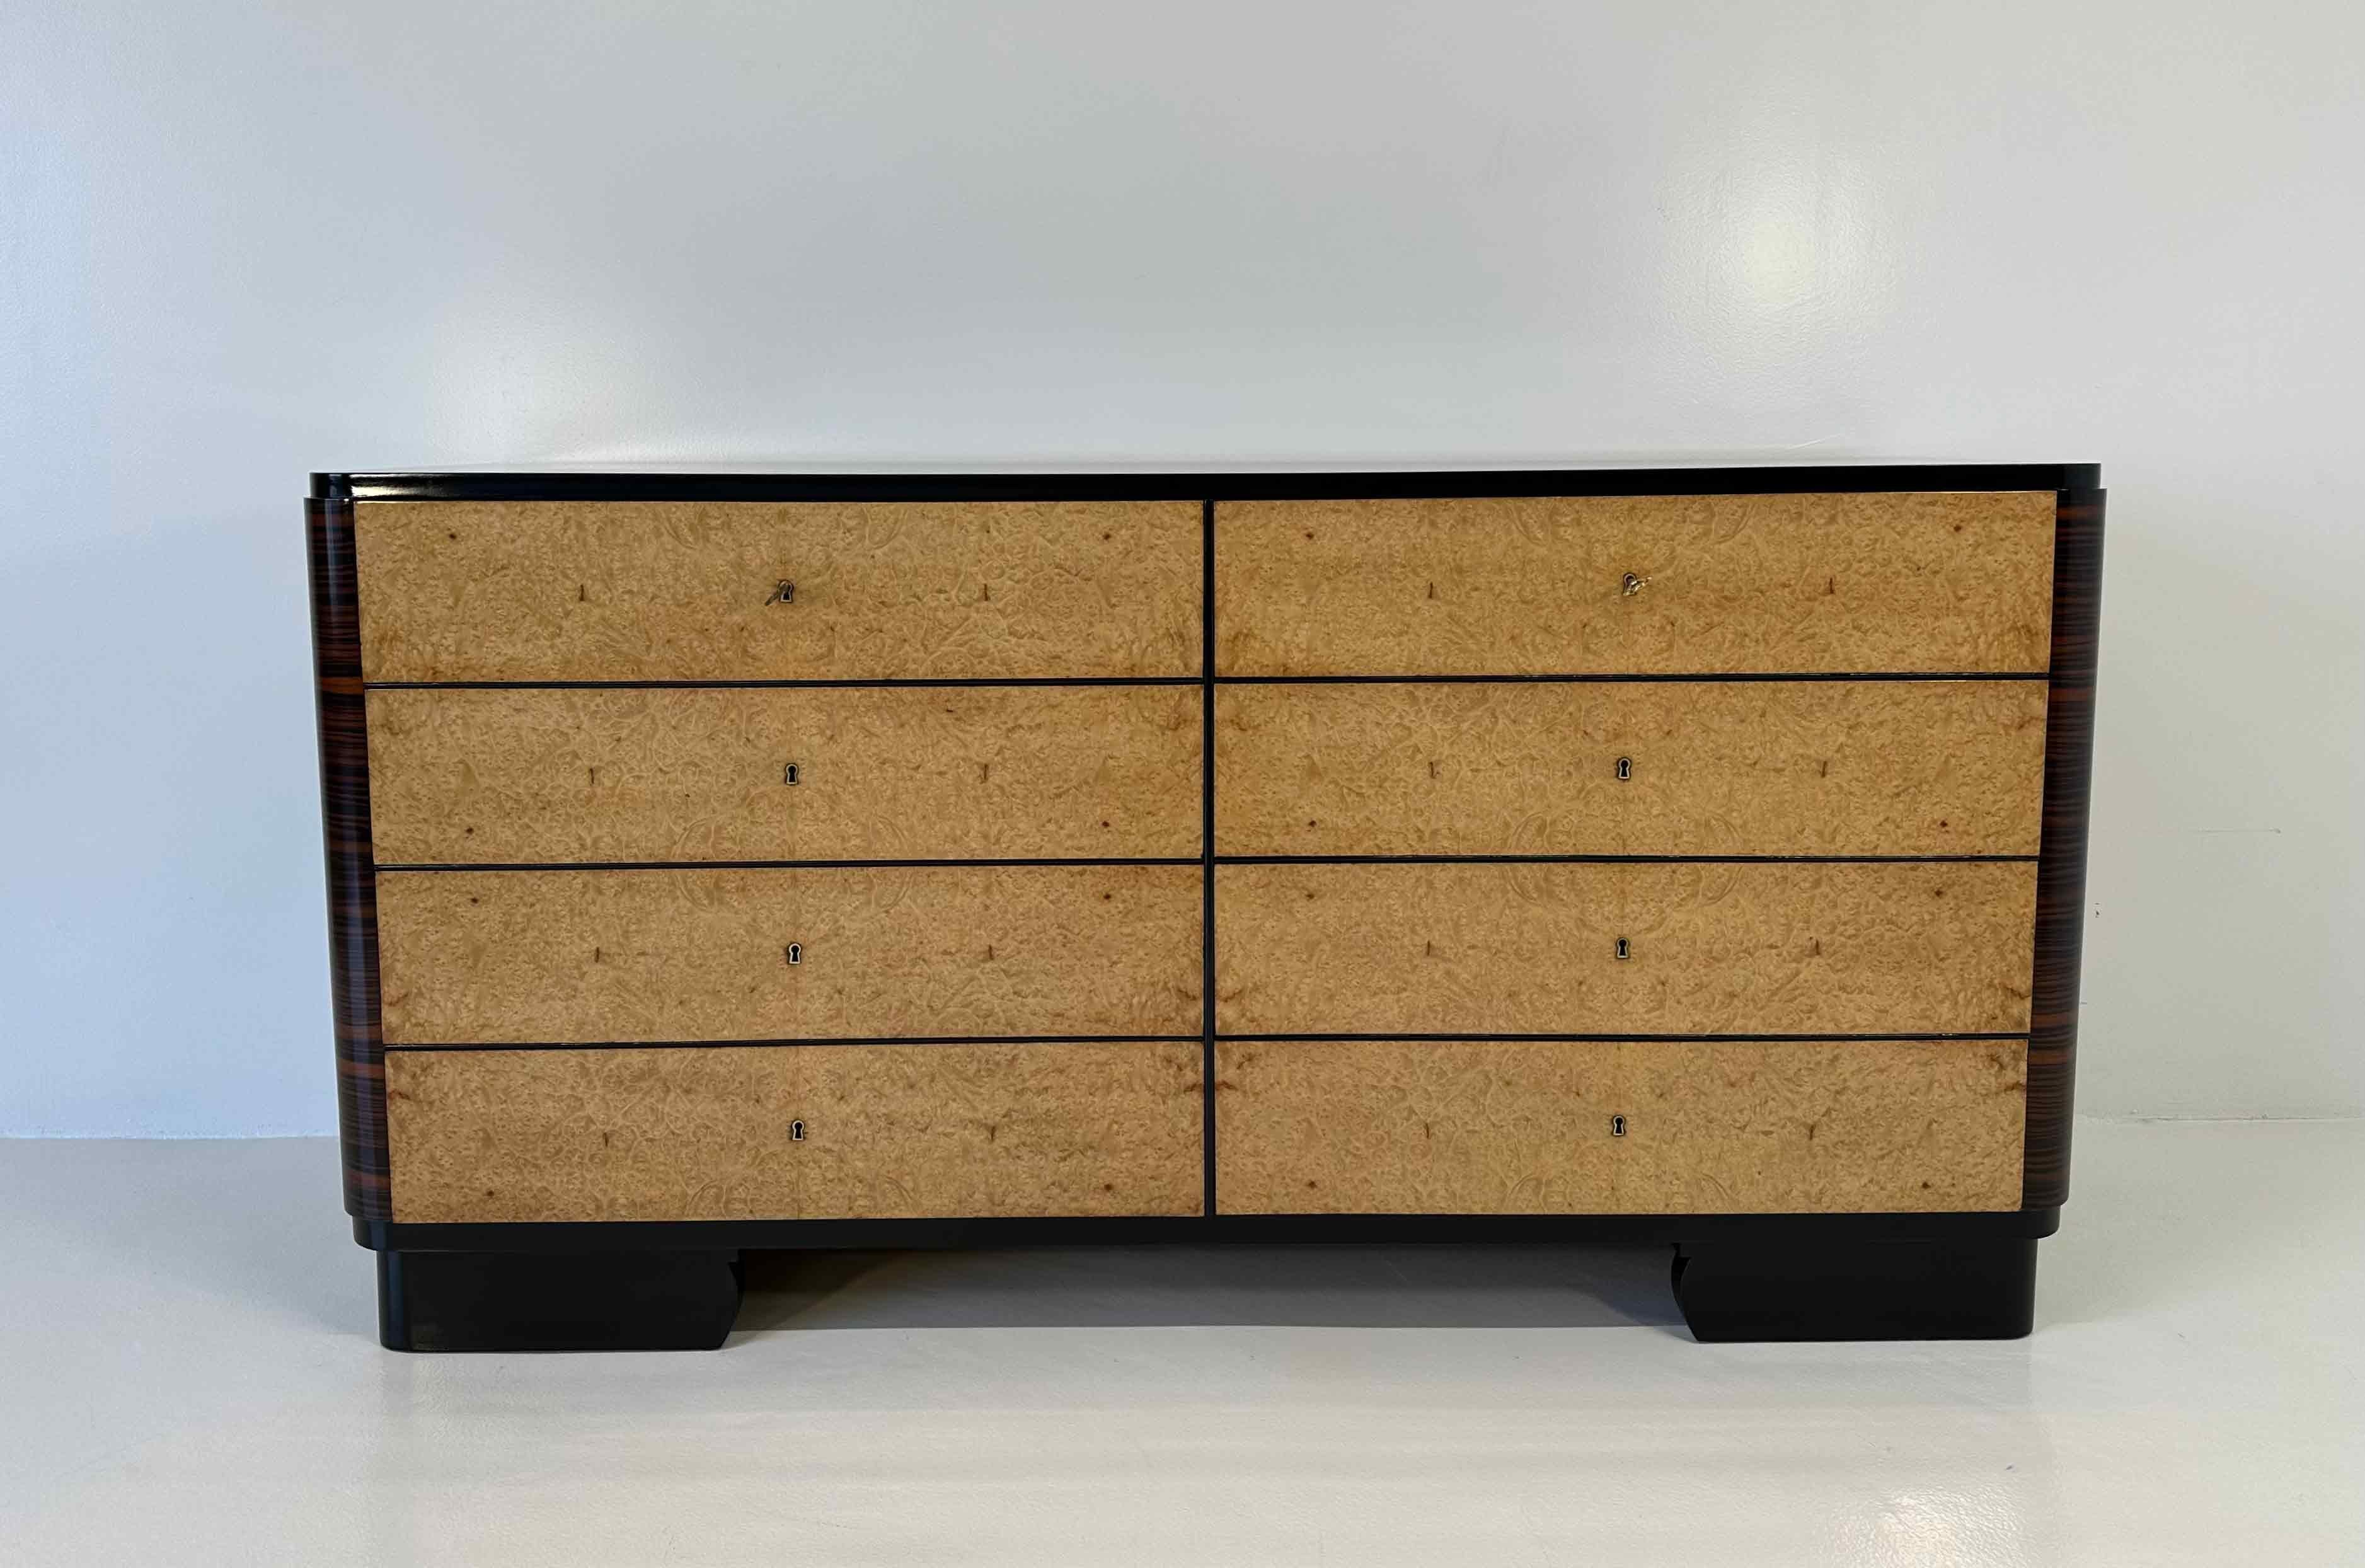 This elegant Art Deco dresser was produced in Italy in the 1930s. 
The drawers are in thuja briar, while the top and the laterals are in Ebony Macassar. The details, such as the profile of the top, the internal edge of the drawers and the base are